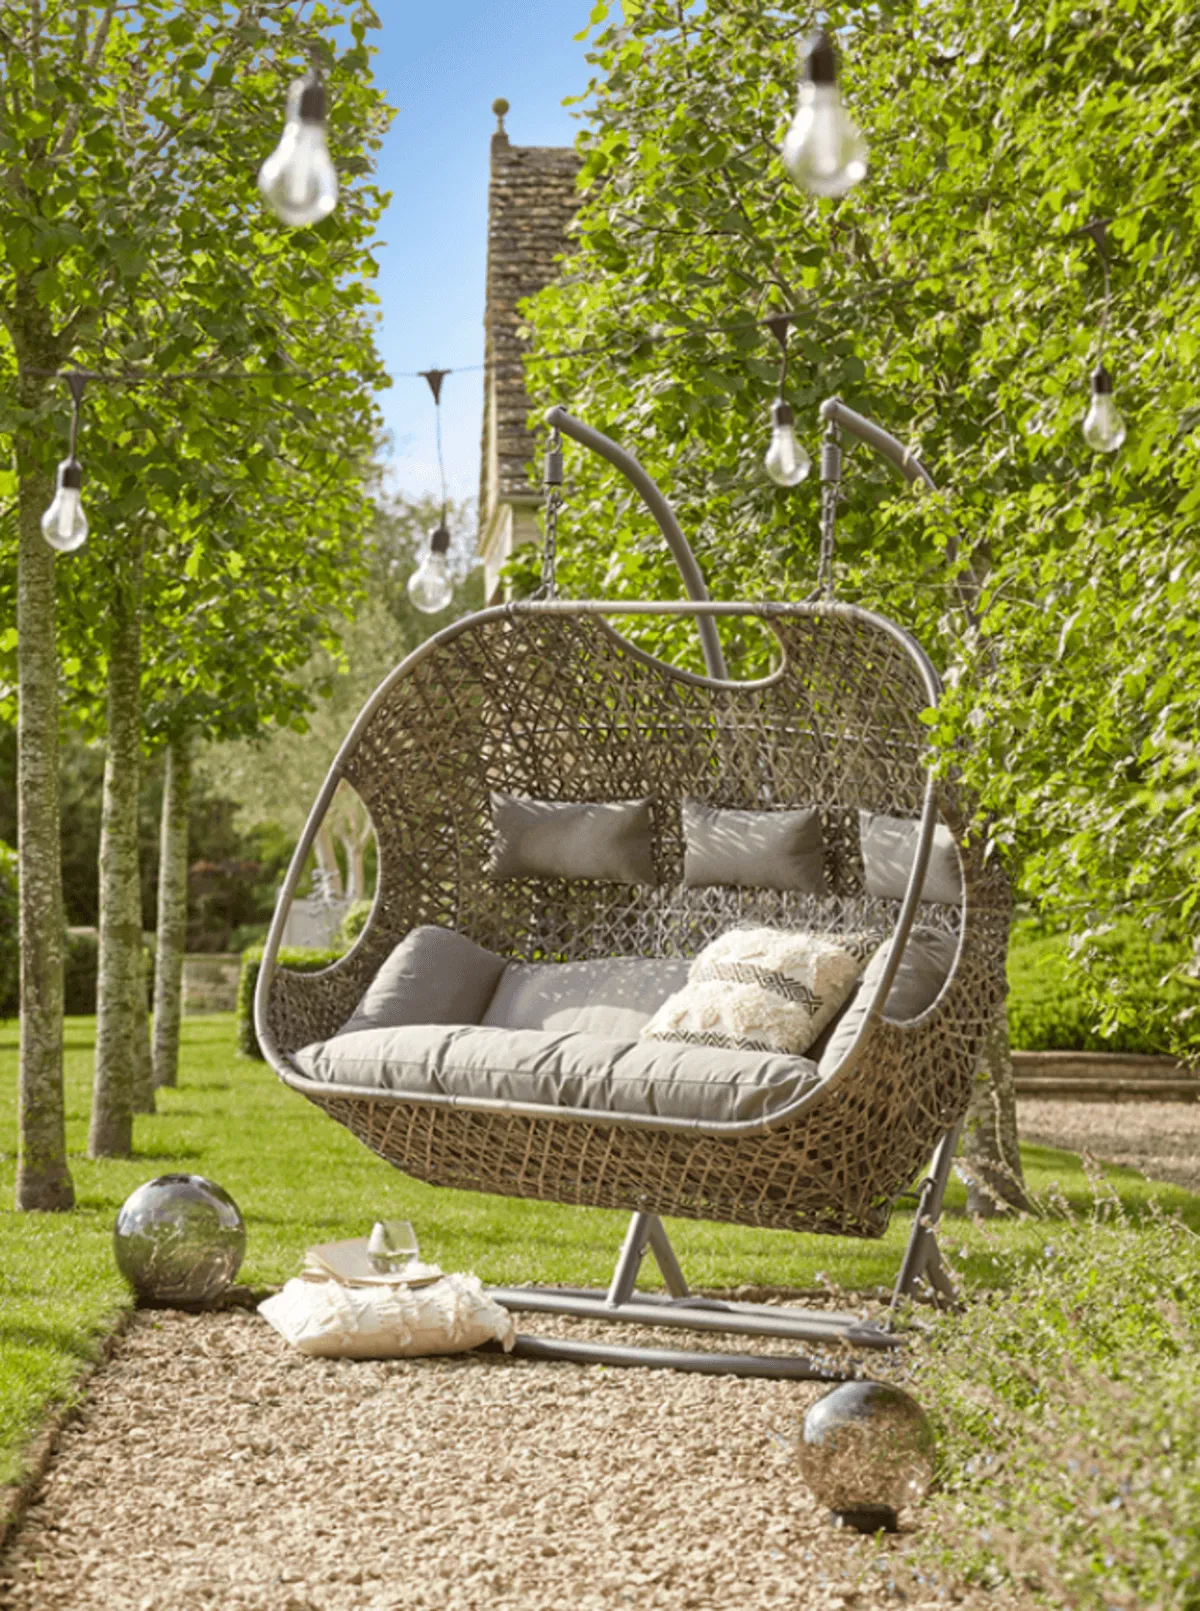 Rattan swing seat that can fit three people at a time